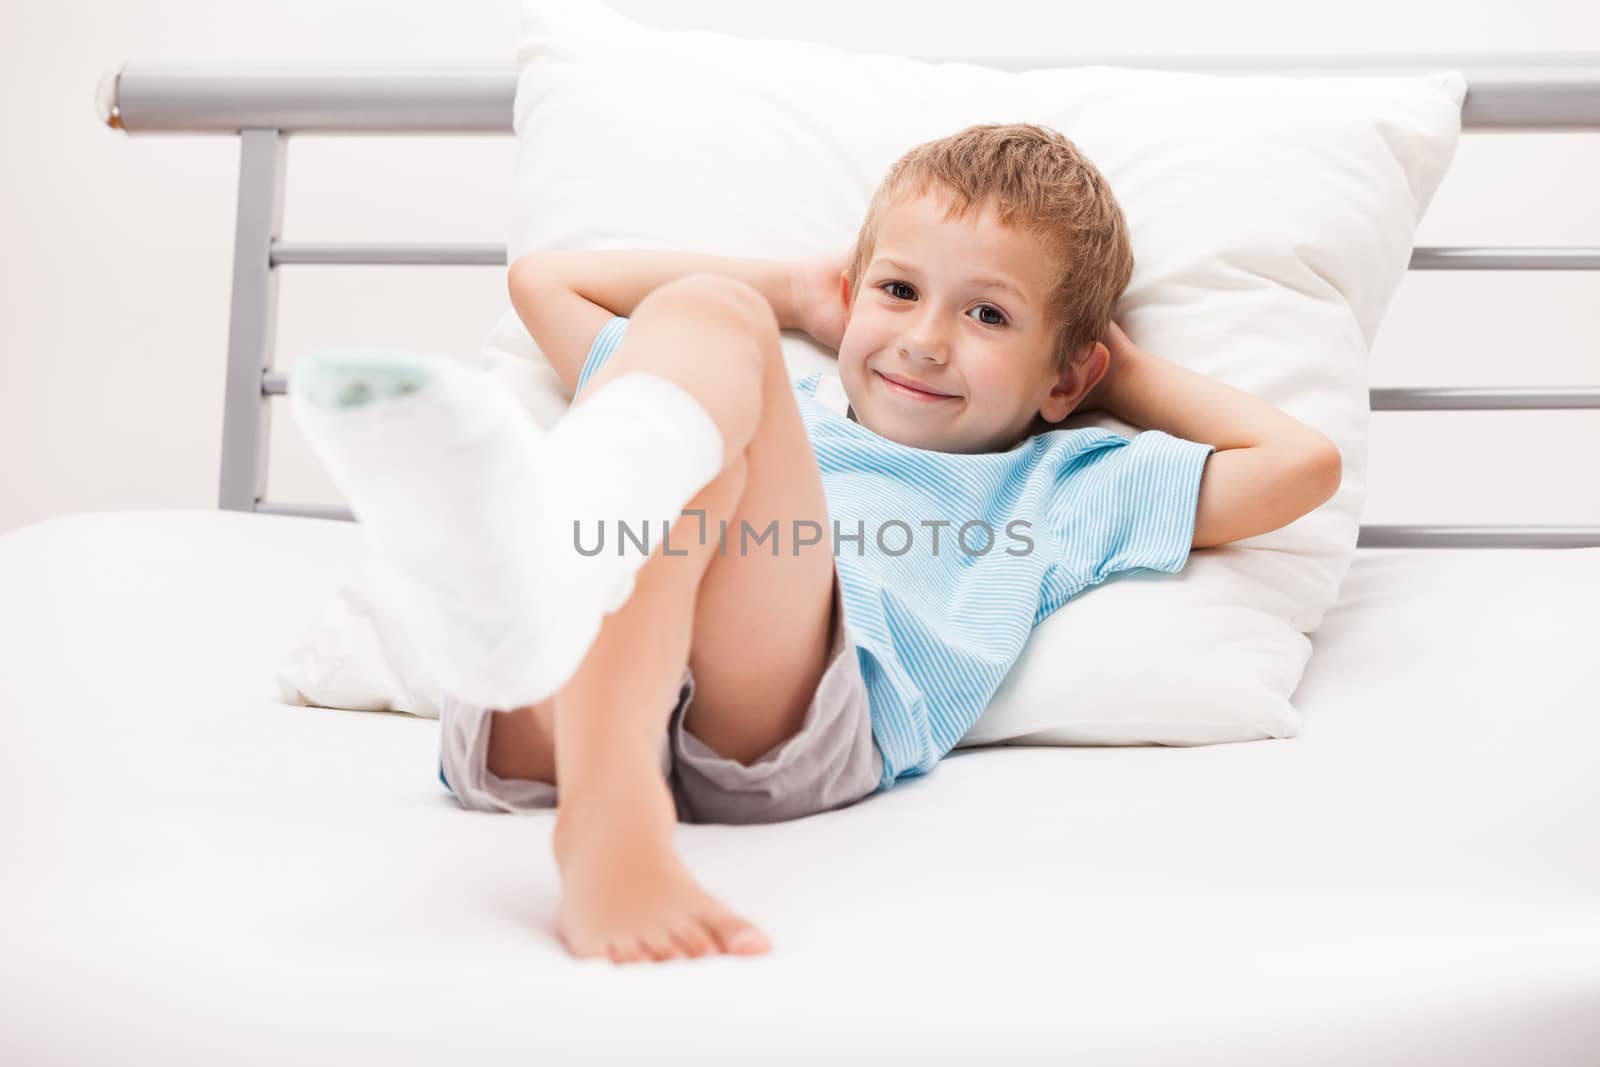 Little child boy with plaster bandage on leg heel fracture or br by ia_64